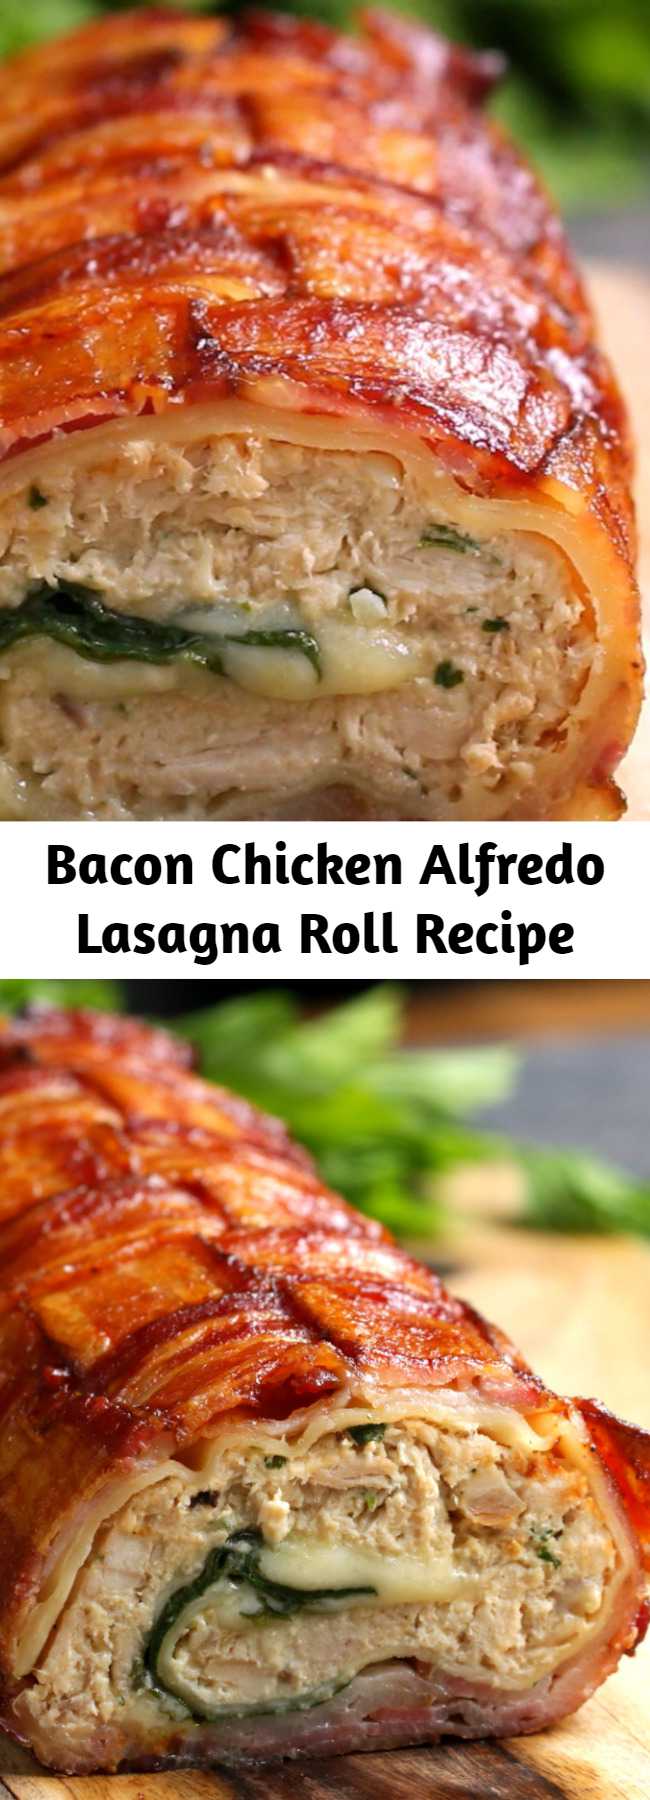 Bacon Chicken Alfredo Lasagna Roll Recipe - Family fav added to weekly suppers!!! Incredibly easy and flavorful! Can almost knock out two dinners with the rotisserie chicken... use half for this roll and the other half for chicken salad, for the next days lunch.